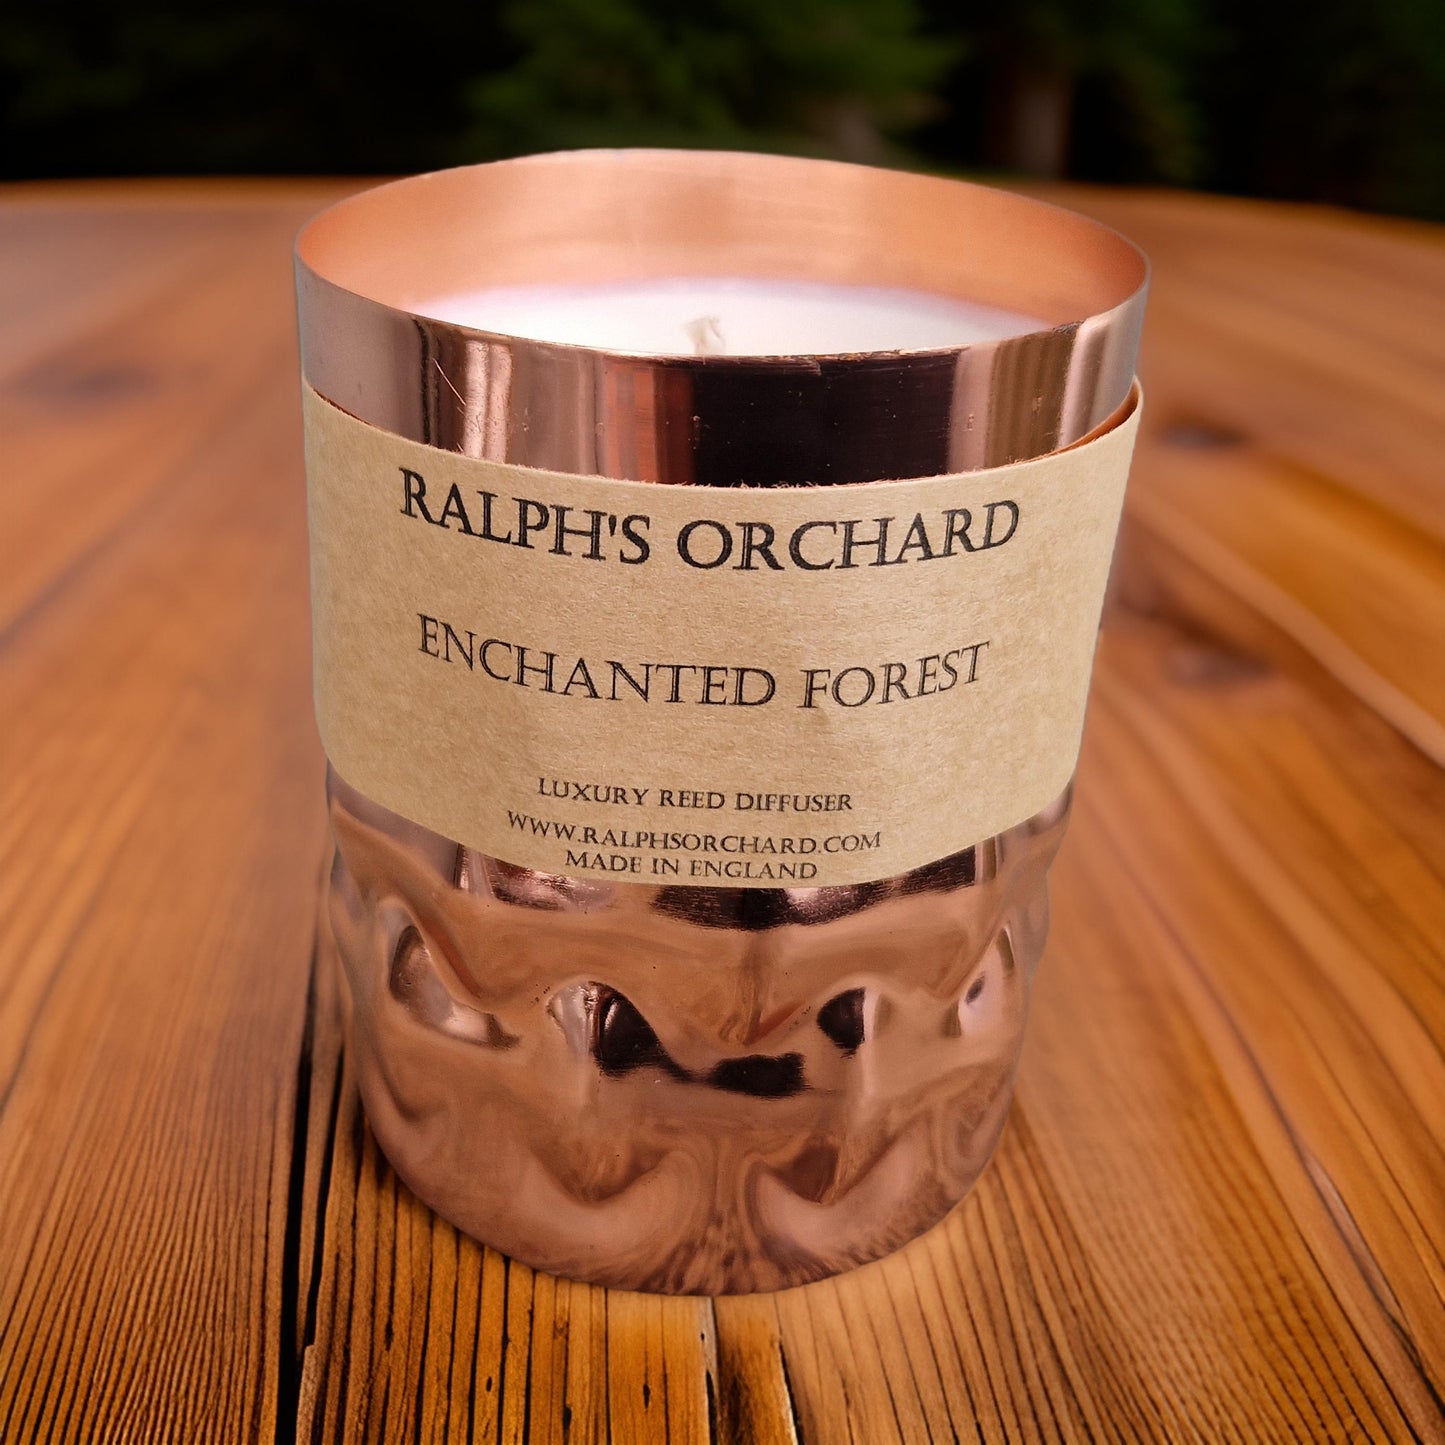 Enchanted Forest (Pine) Scented Candle